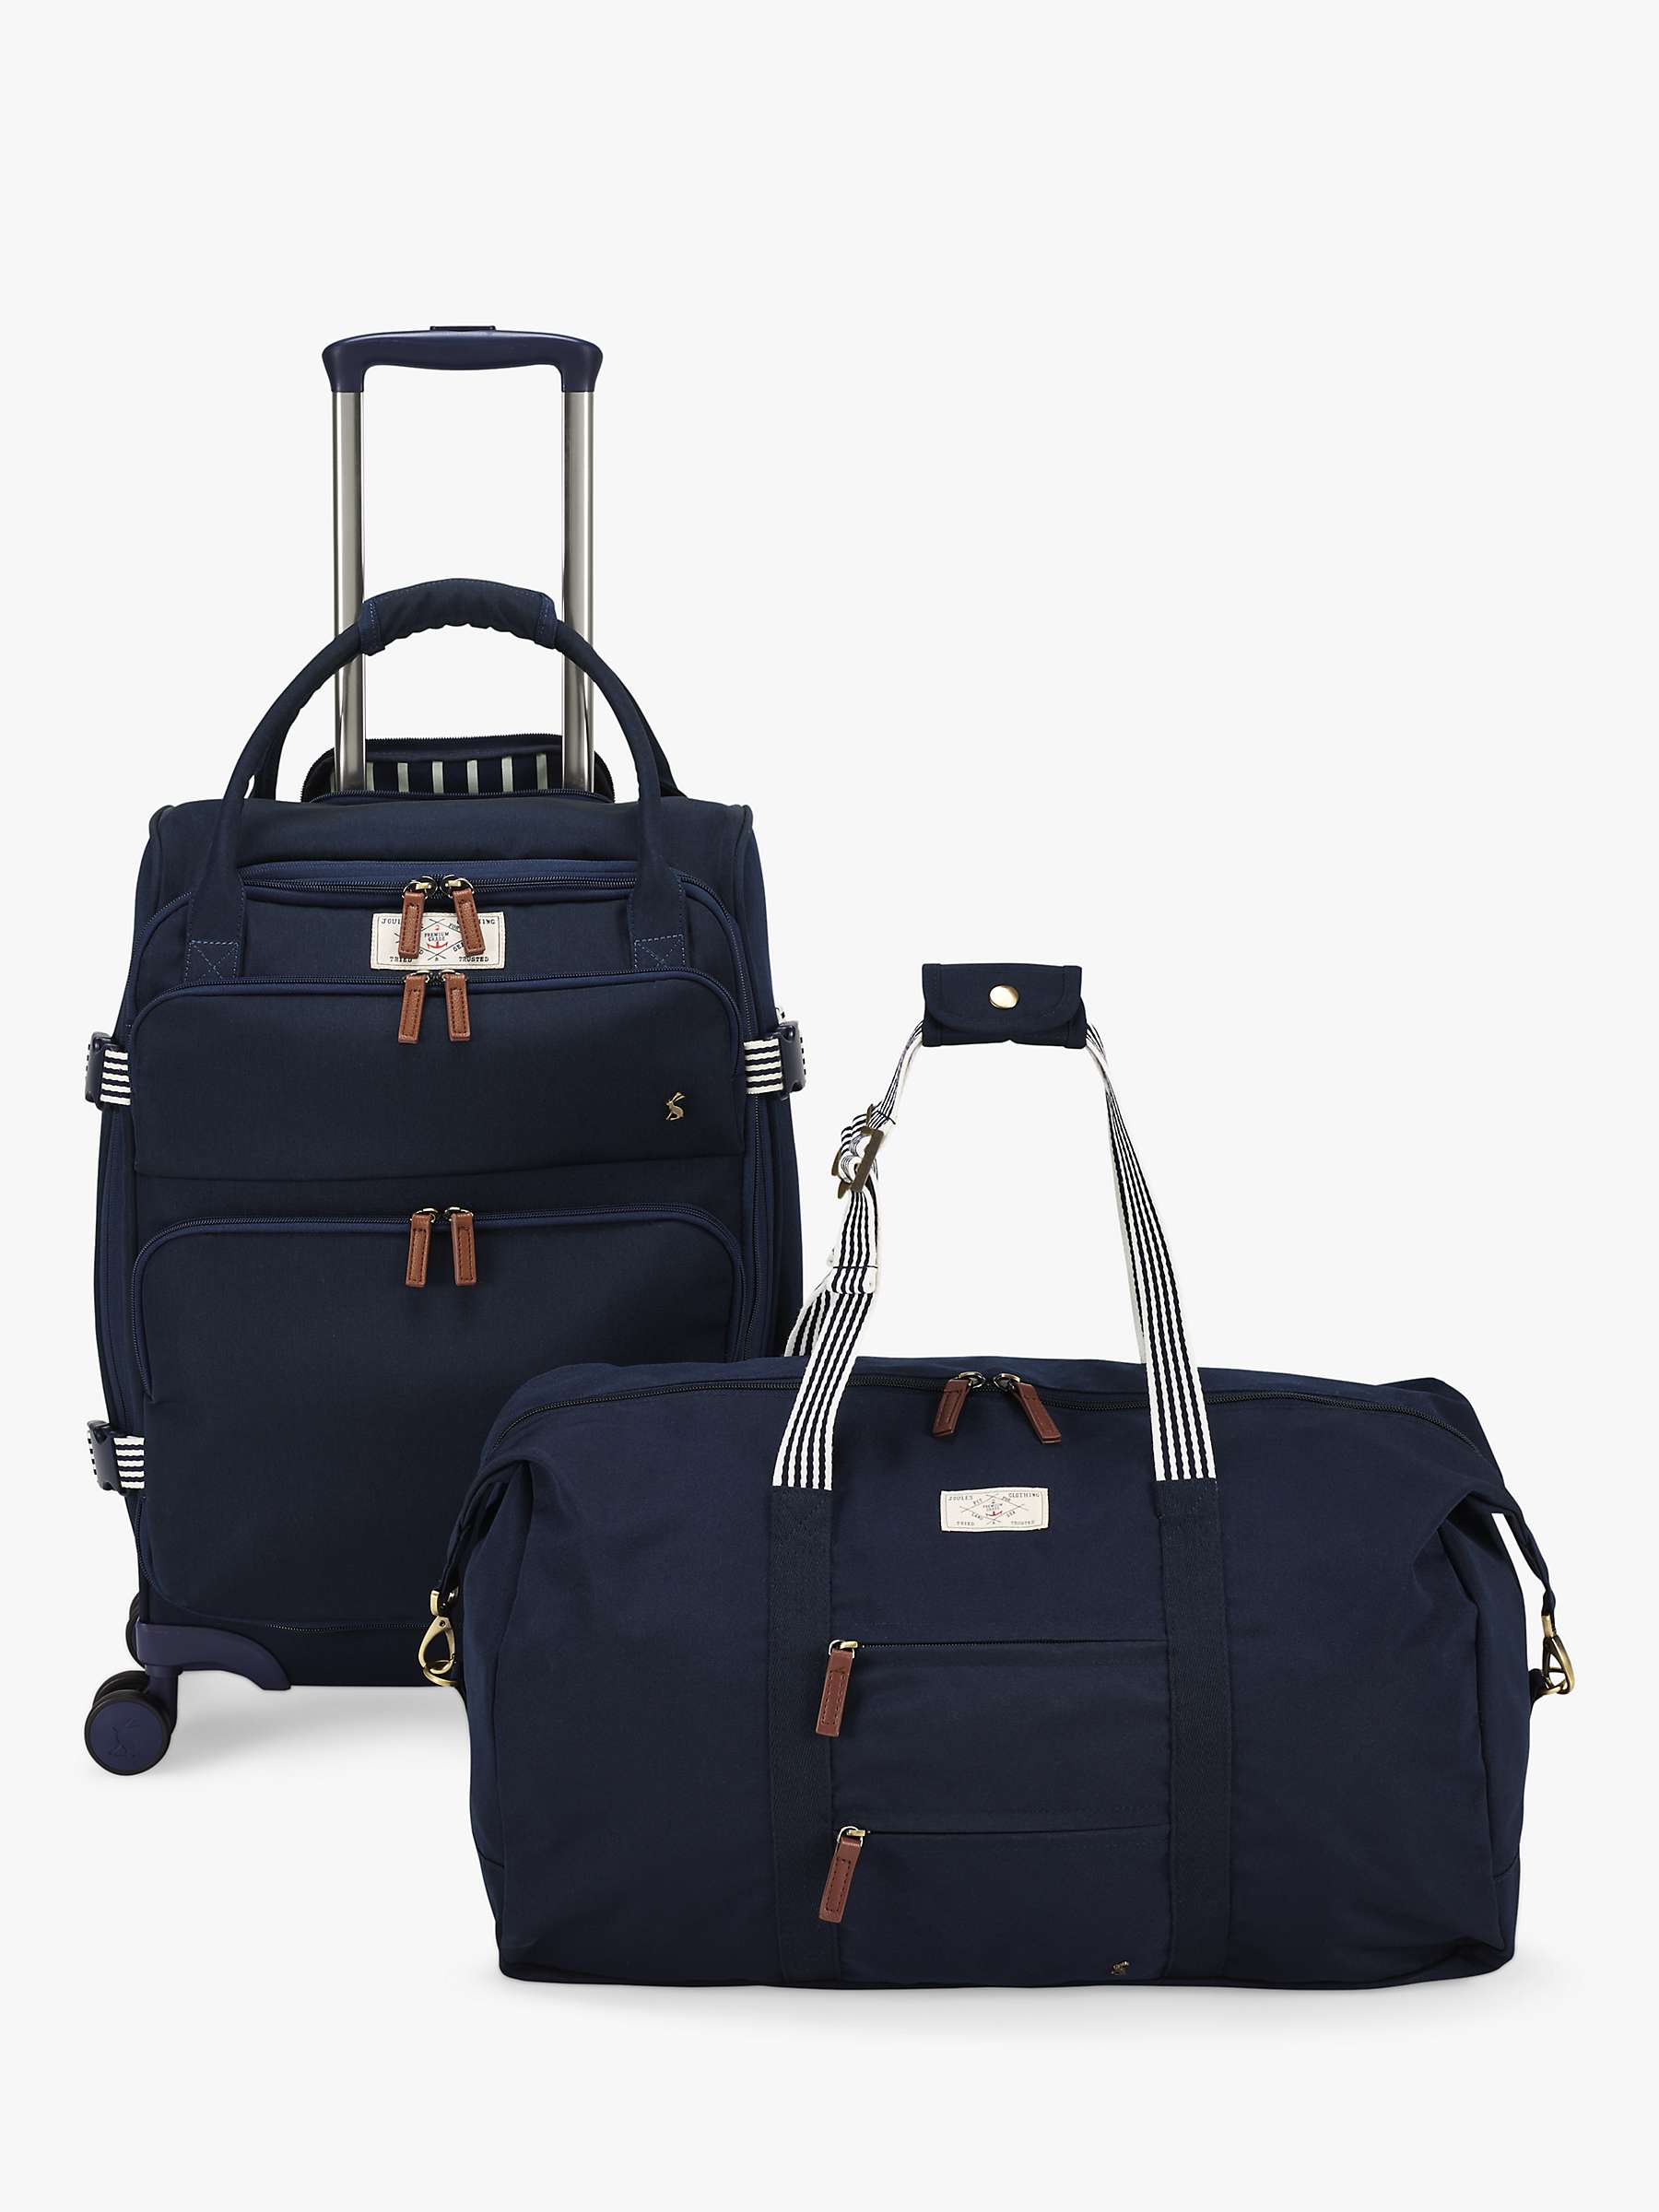 Buy Joules Coast Collection Duffle Bag Online at johnlewis.com